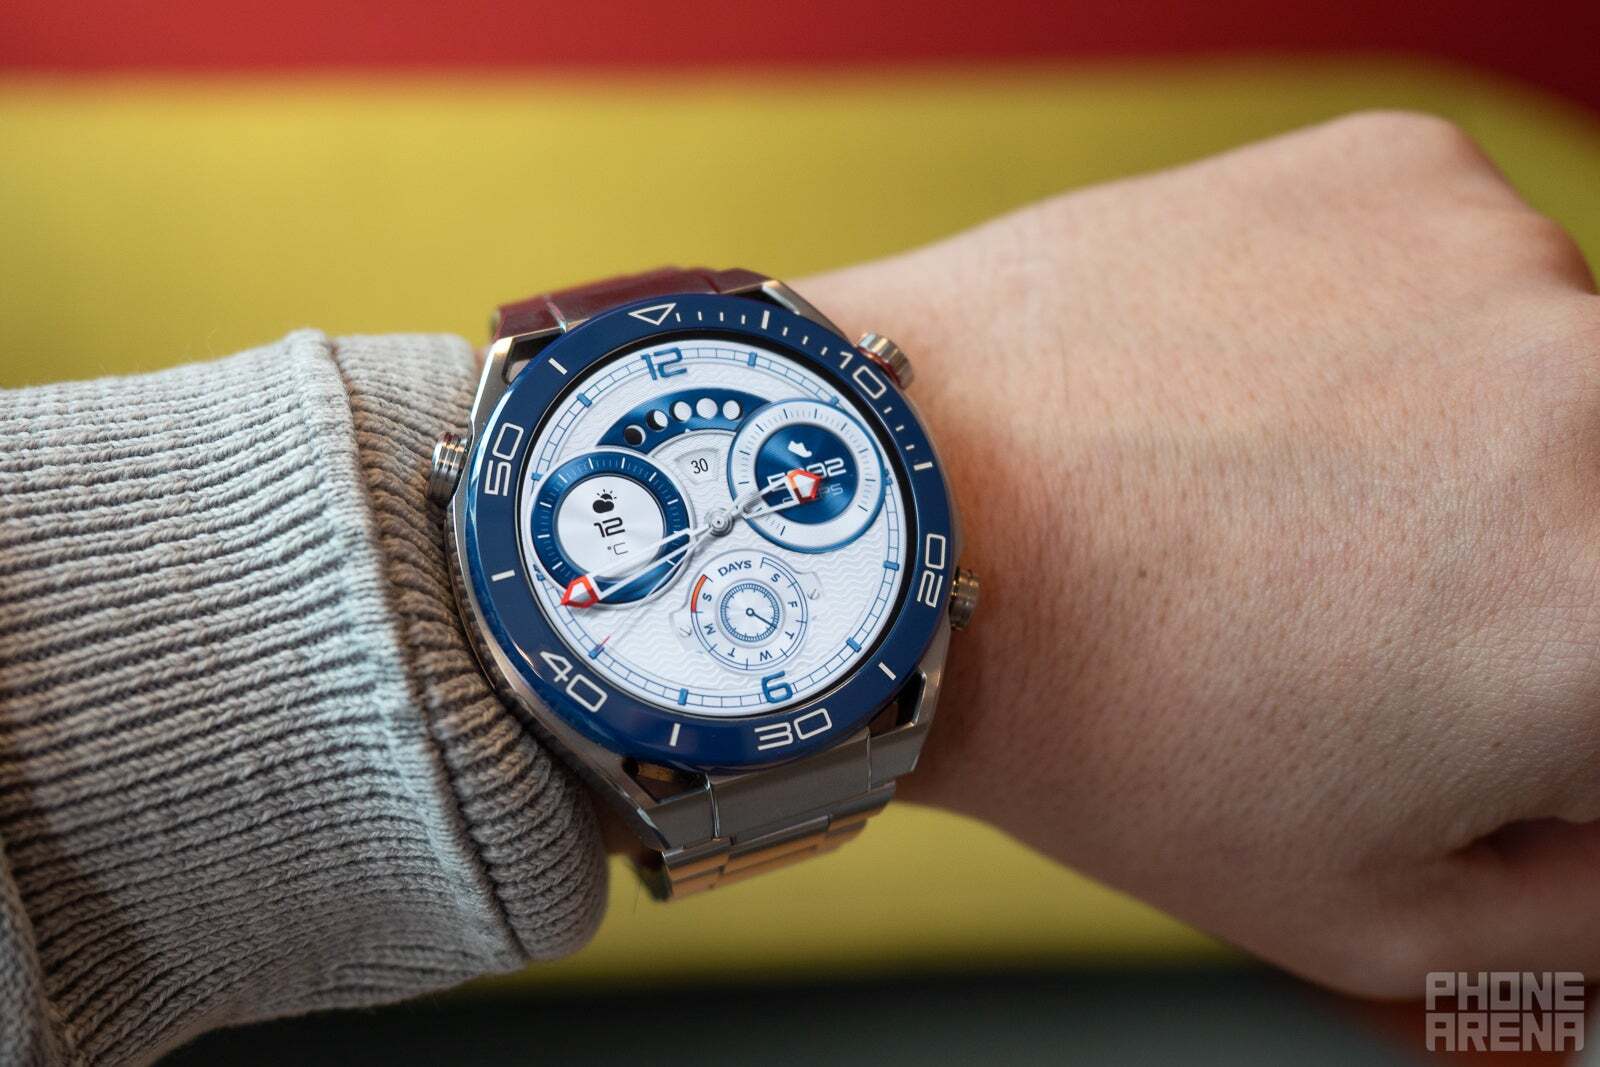 Pretty, isn't it? It costs almost $1000! - Smartwatches are useless. Change my mind!